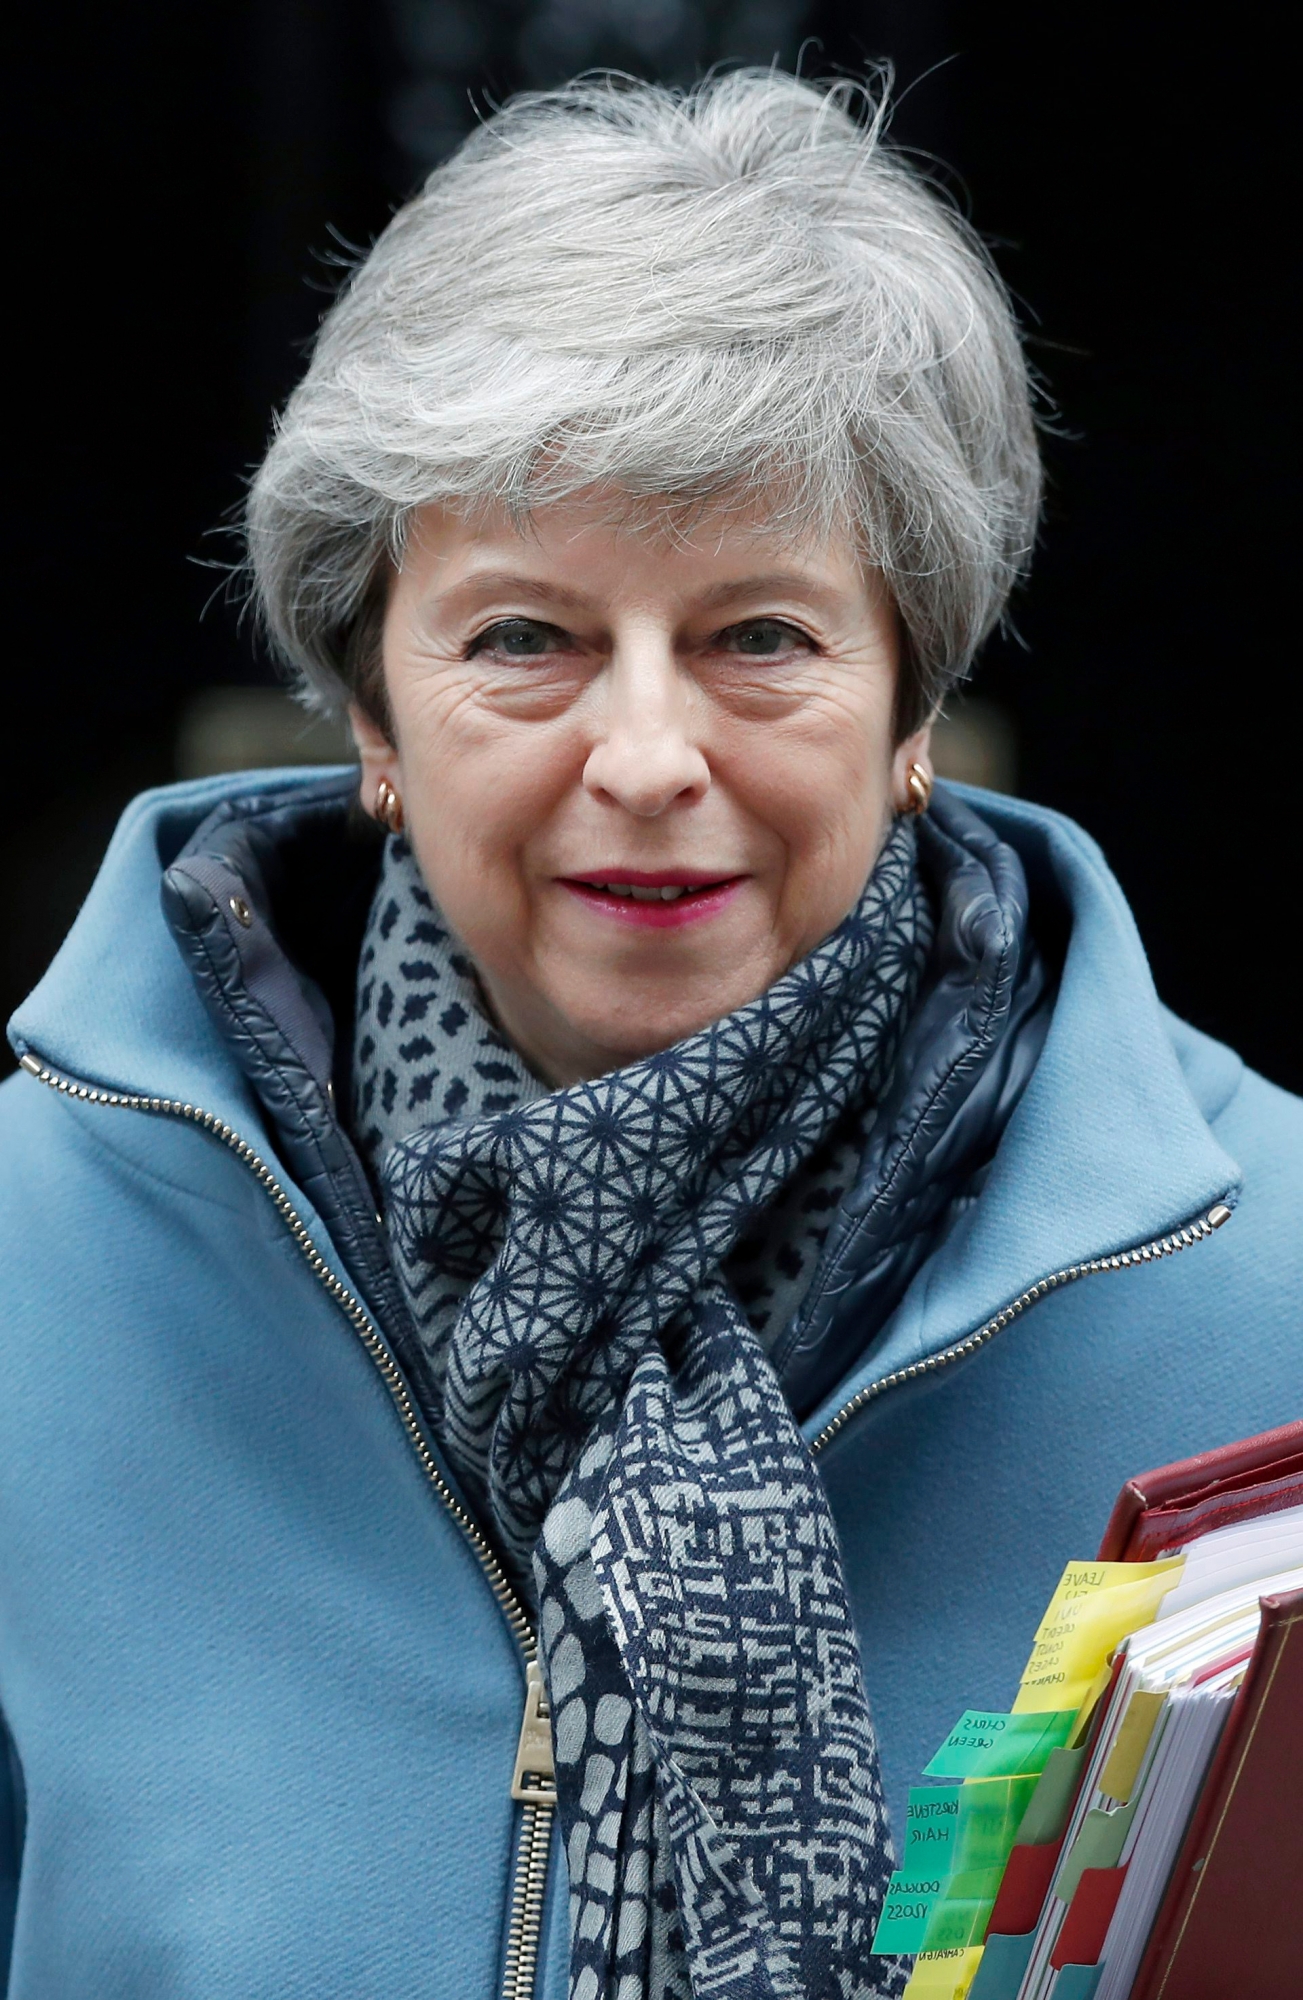 Britain's Prime Minister Theresa May leaves 10 Downing street to attend her weekly Prime Minster's Questions at the House of Commons, in London, Wednesday, March 27, 2019.  British lawmakers are preparing to vote Wednesday on alternatives for leaving the European Union as they seek to end an impasse following the overwhelming defeat of the deal negotiated by Prime Minister Theresa May. (AP Photo/Alastair Grant) Britain Brexit